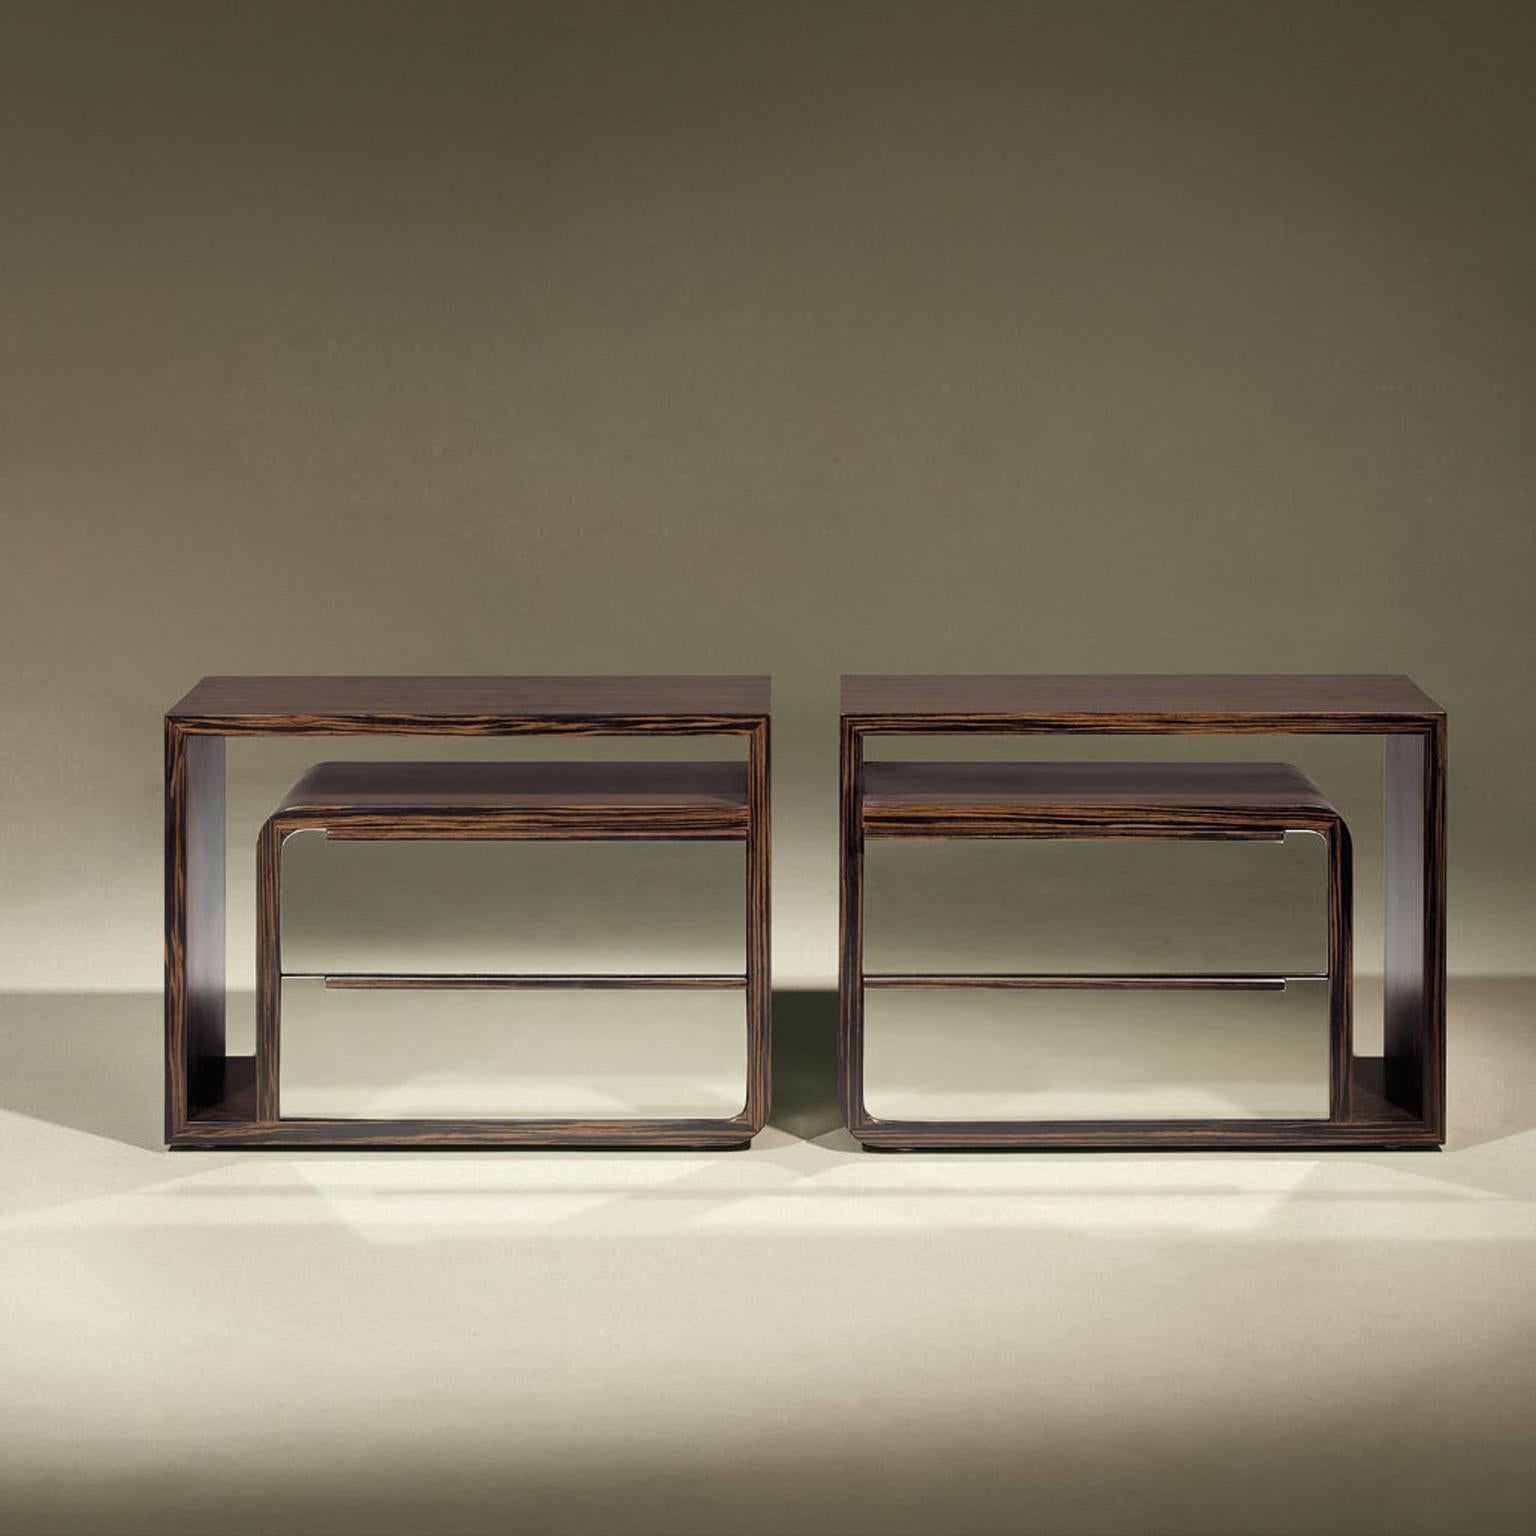 Rose Contemporary Bedside Table with Two Mirrored Drawers by Luísa Peixoto For Sale 6